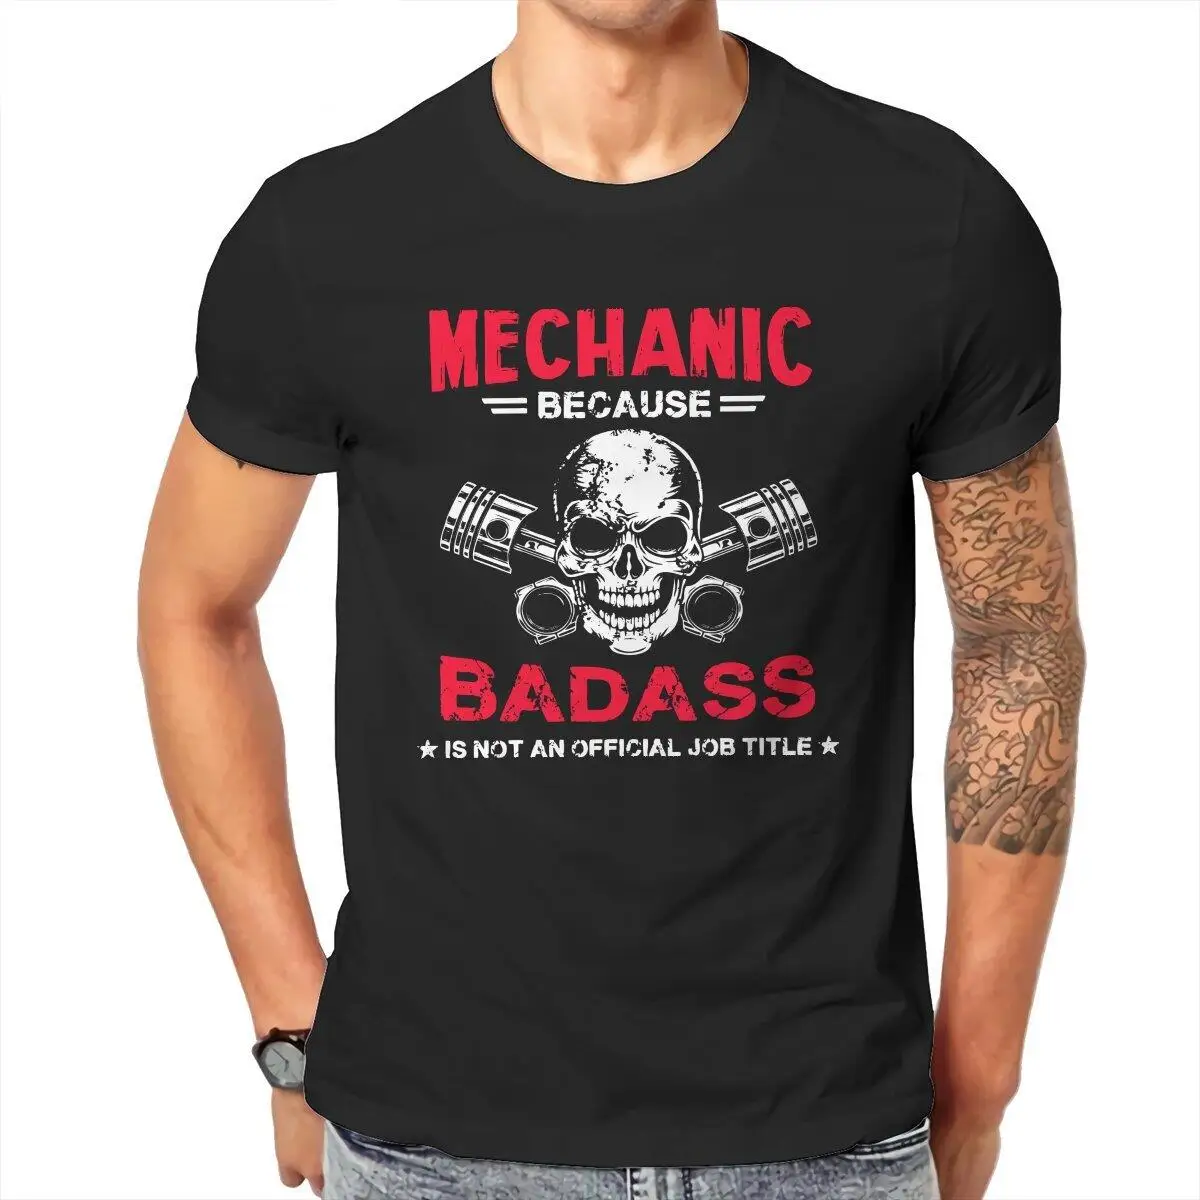 Mechanic Because Badass Is Not Official Job Title T-Shirt for Men Cotton Tees Round Collar Short Sleeve T Shirts Party Clothing